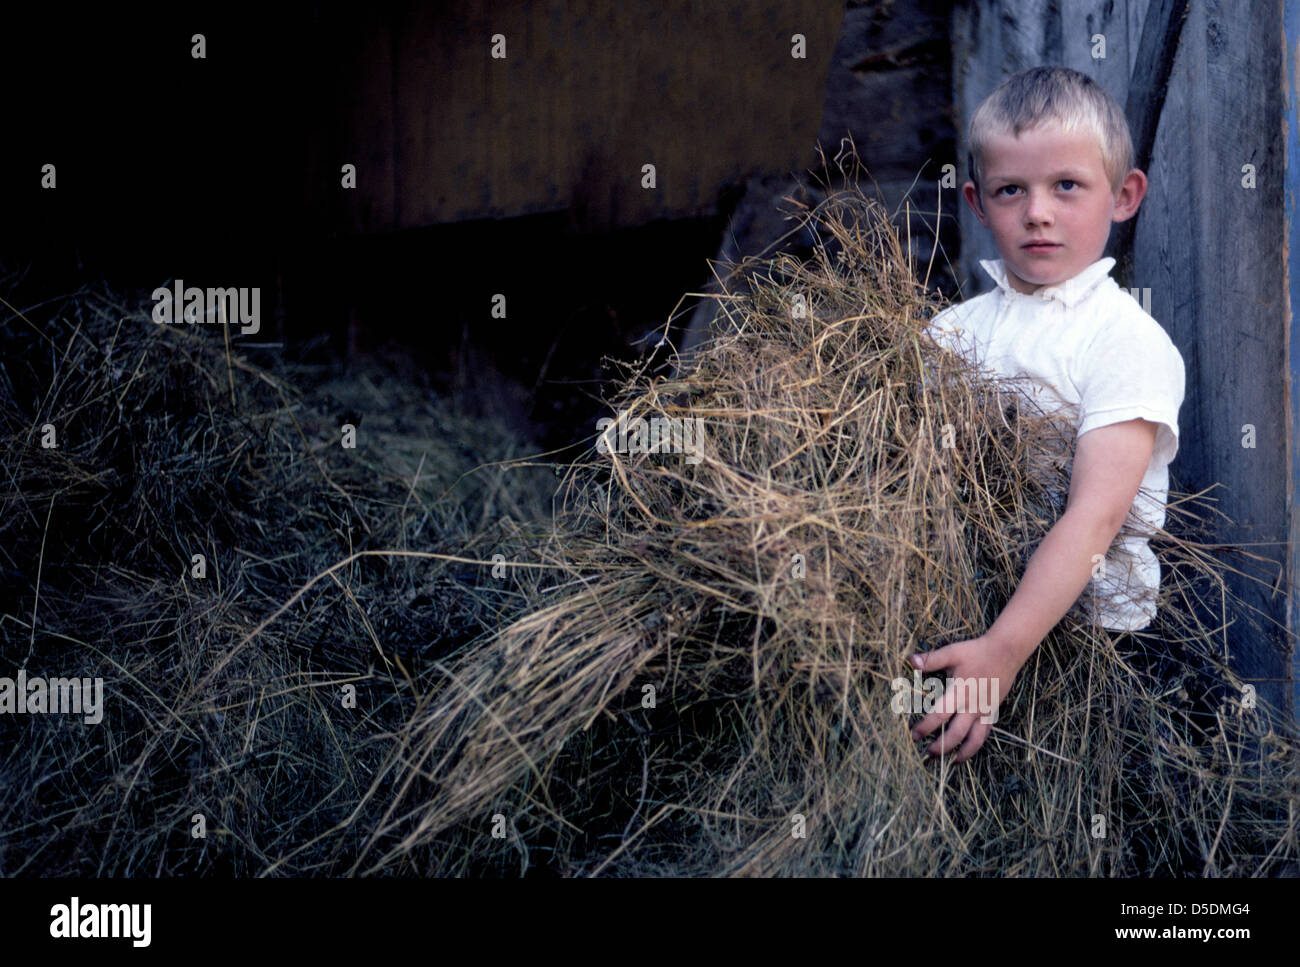 A young Norwegian boy poses for a photo while gathering hay from a barn to feed the workhorses on his family farm in Bergen, Norway, in Scandinavia. Stock Photo